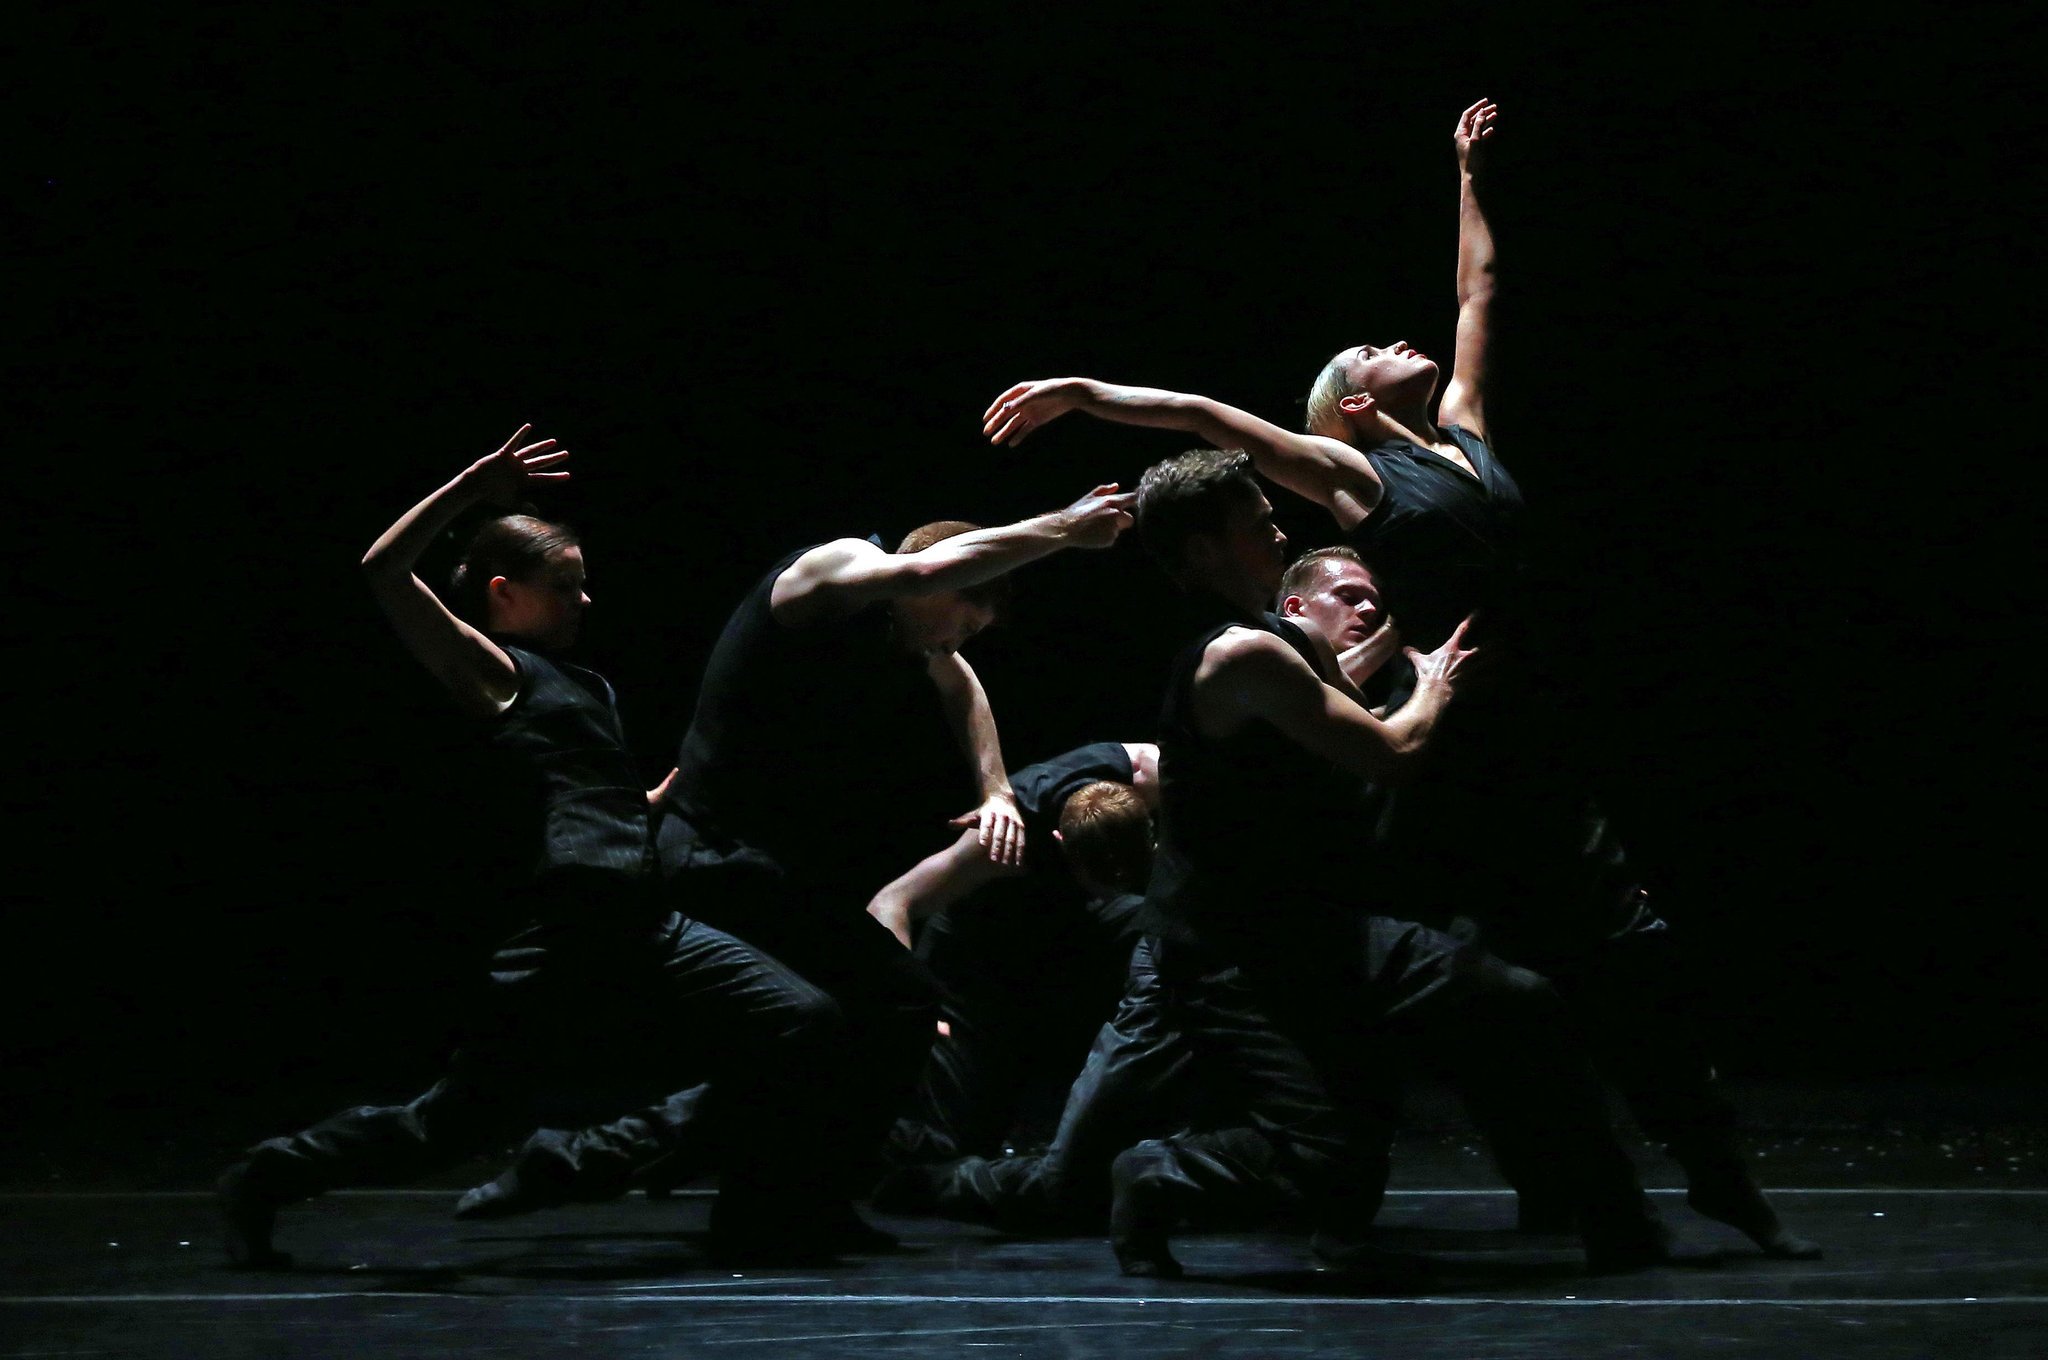 Ballet BC- “Solo Echo,” a dance full of yearning choreographed by Crystal Pite, an alumna of Ballet Frankfurt, at the Joyce Theater on Wednesday. Credit Andrea Mohin:The New York Times